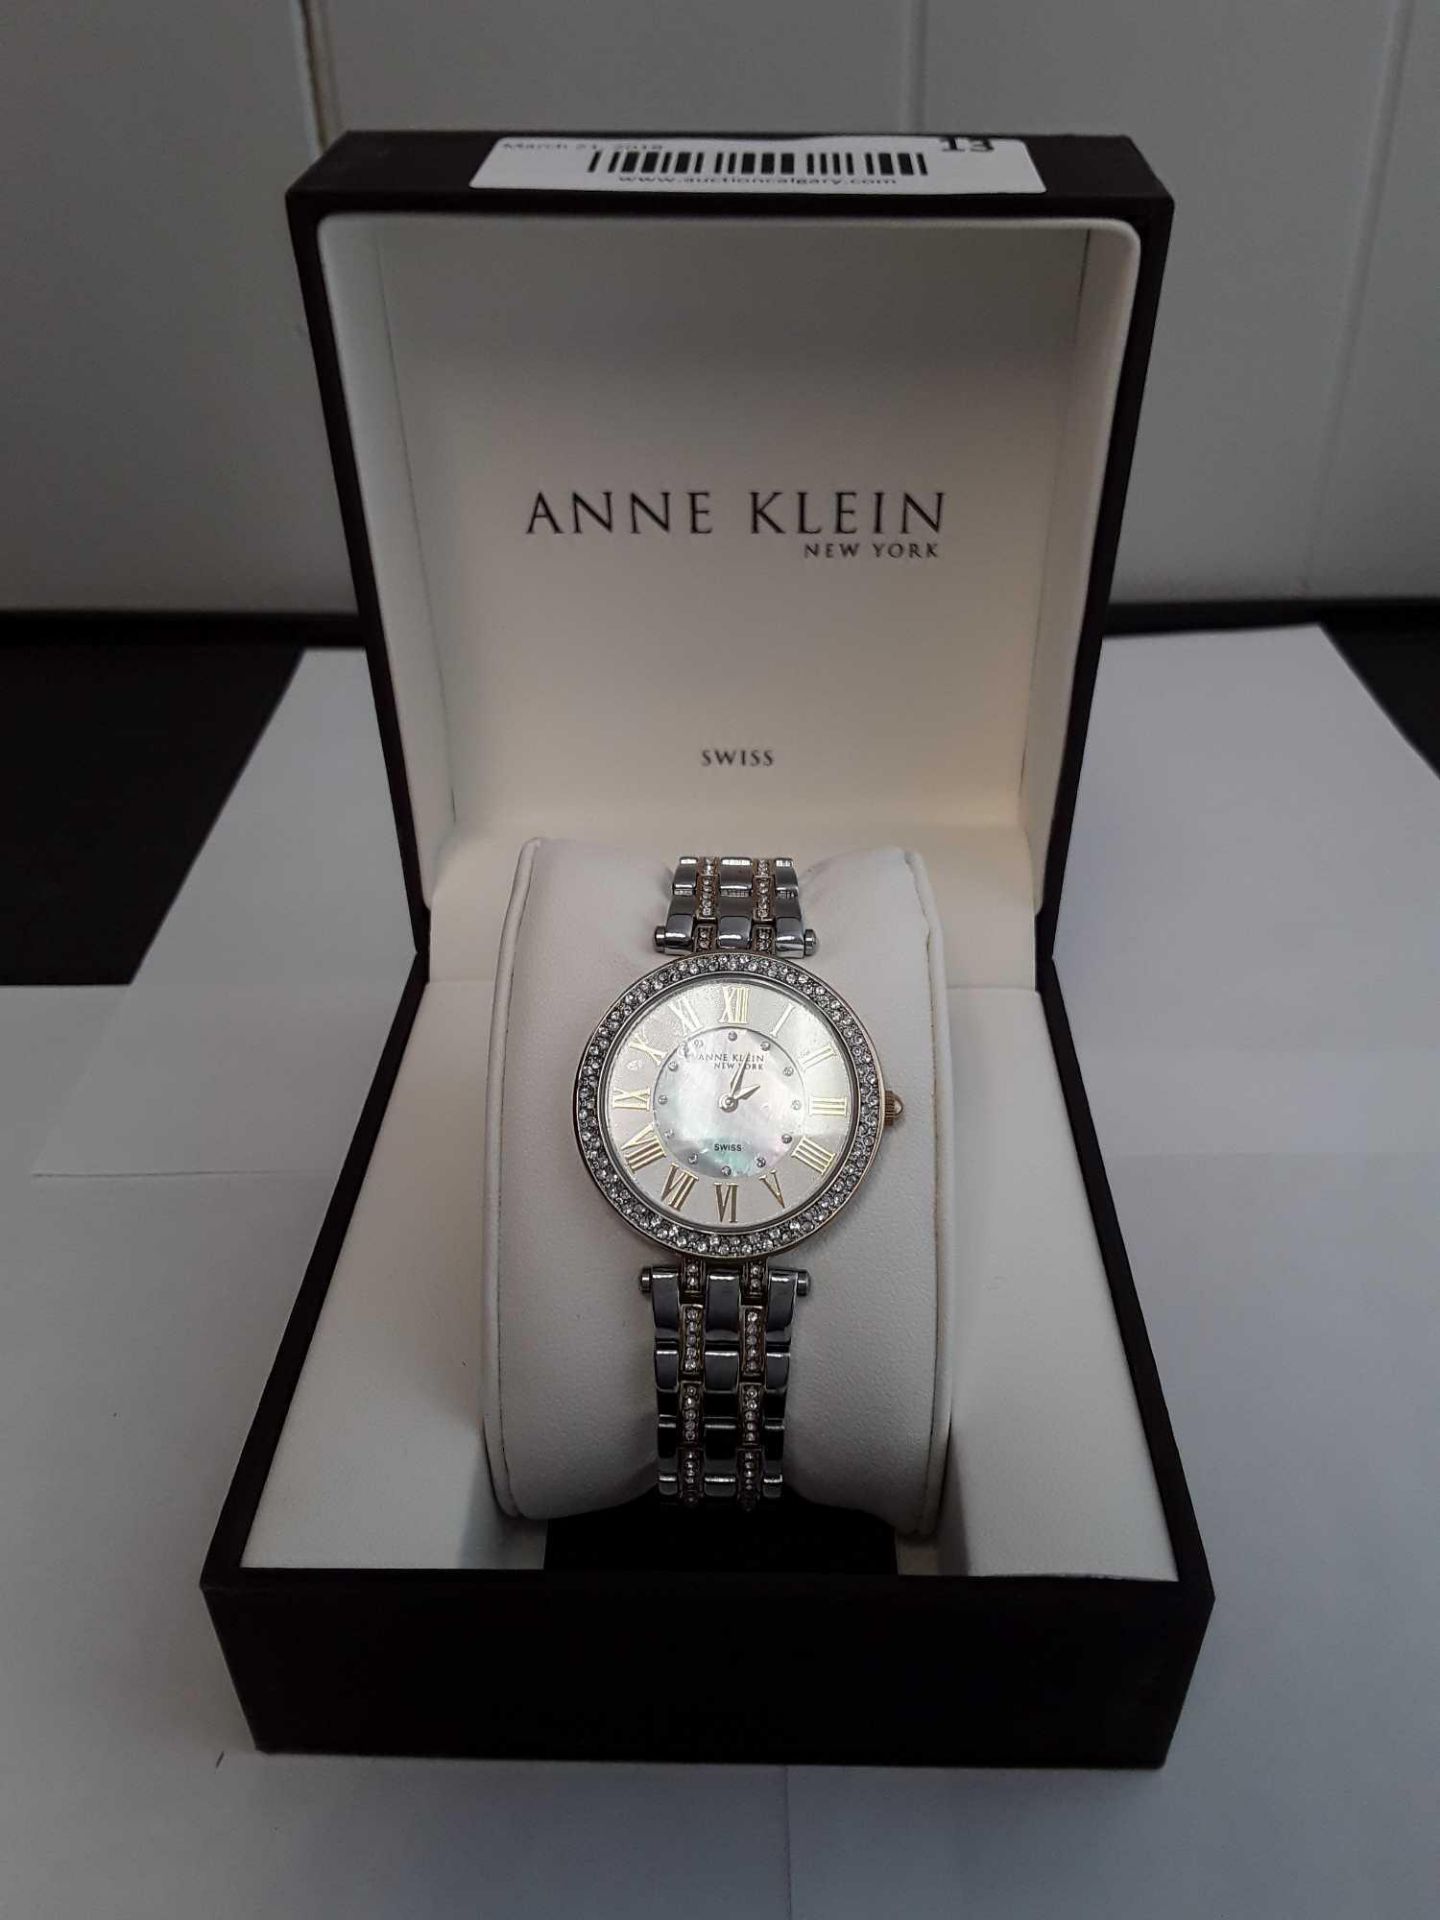 Anne Klein Women's Watch - Crystals around Face and On Silver Band includes Box